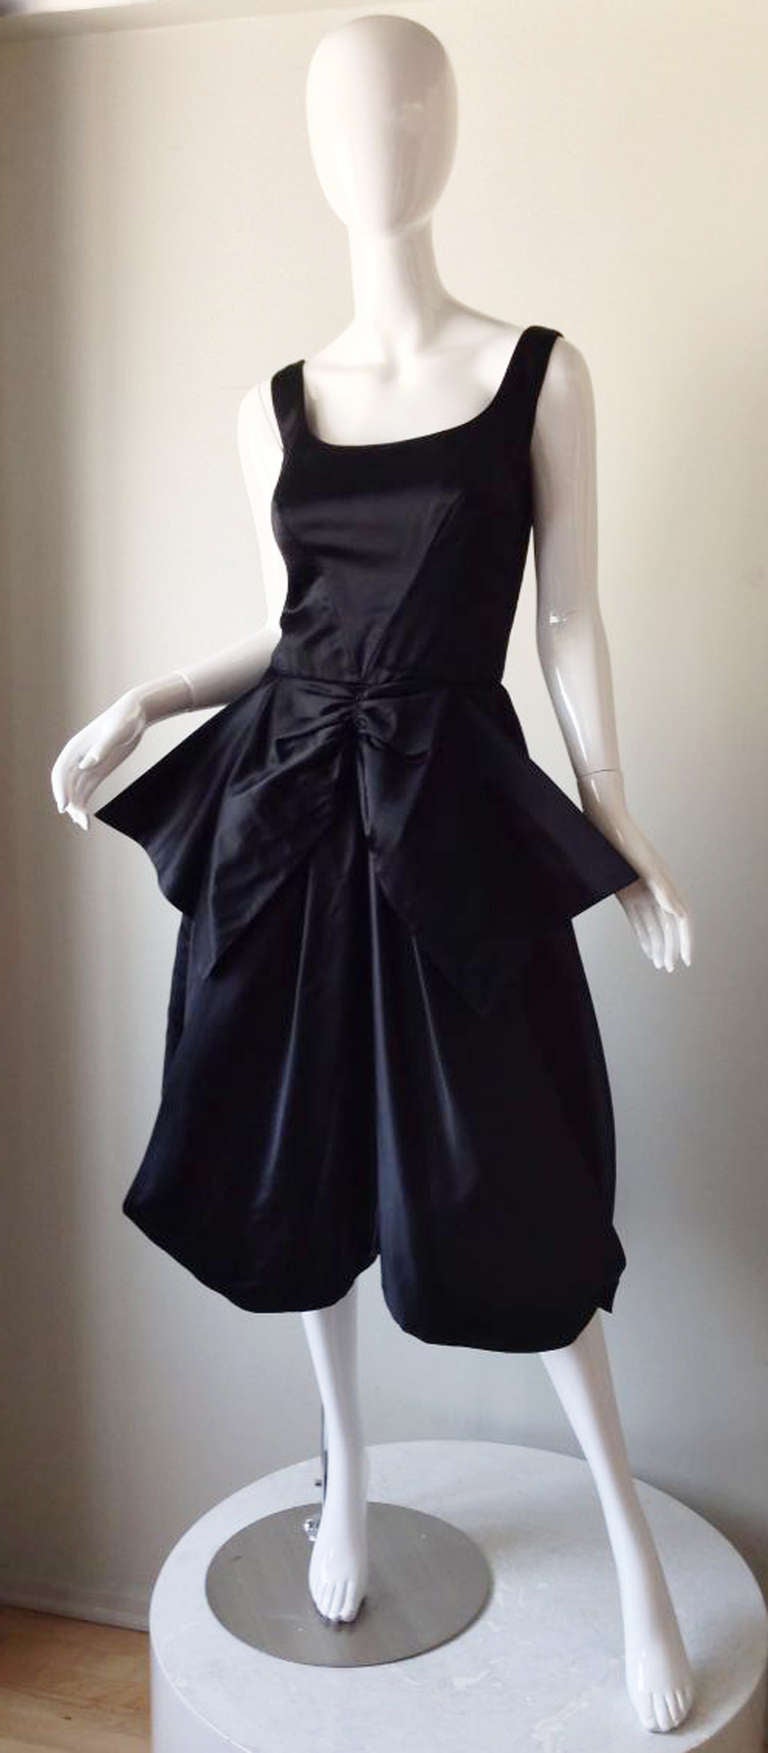 A fine and rare vintage Mr. Blackwell cocktail dress. Ink black silk satin item features full draped skirt and huge matching fabric bow center waist. Item fully lined and zips up back. Pristine.